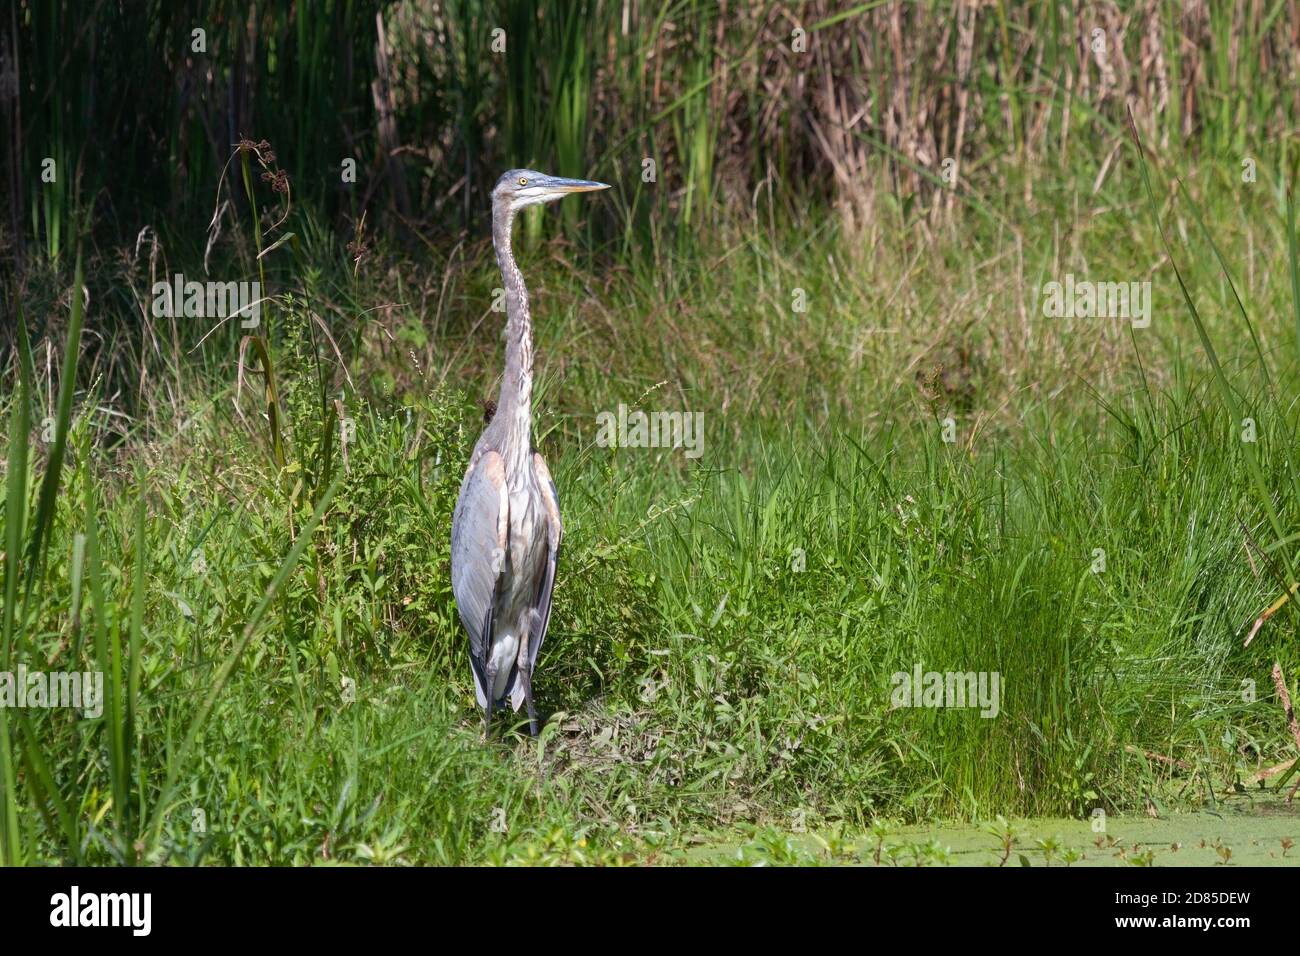 In the mist of the green wetland grasses , a great blue heron stands at attention. Stock Photo